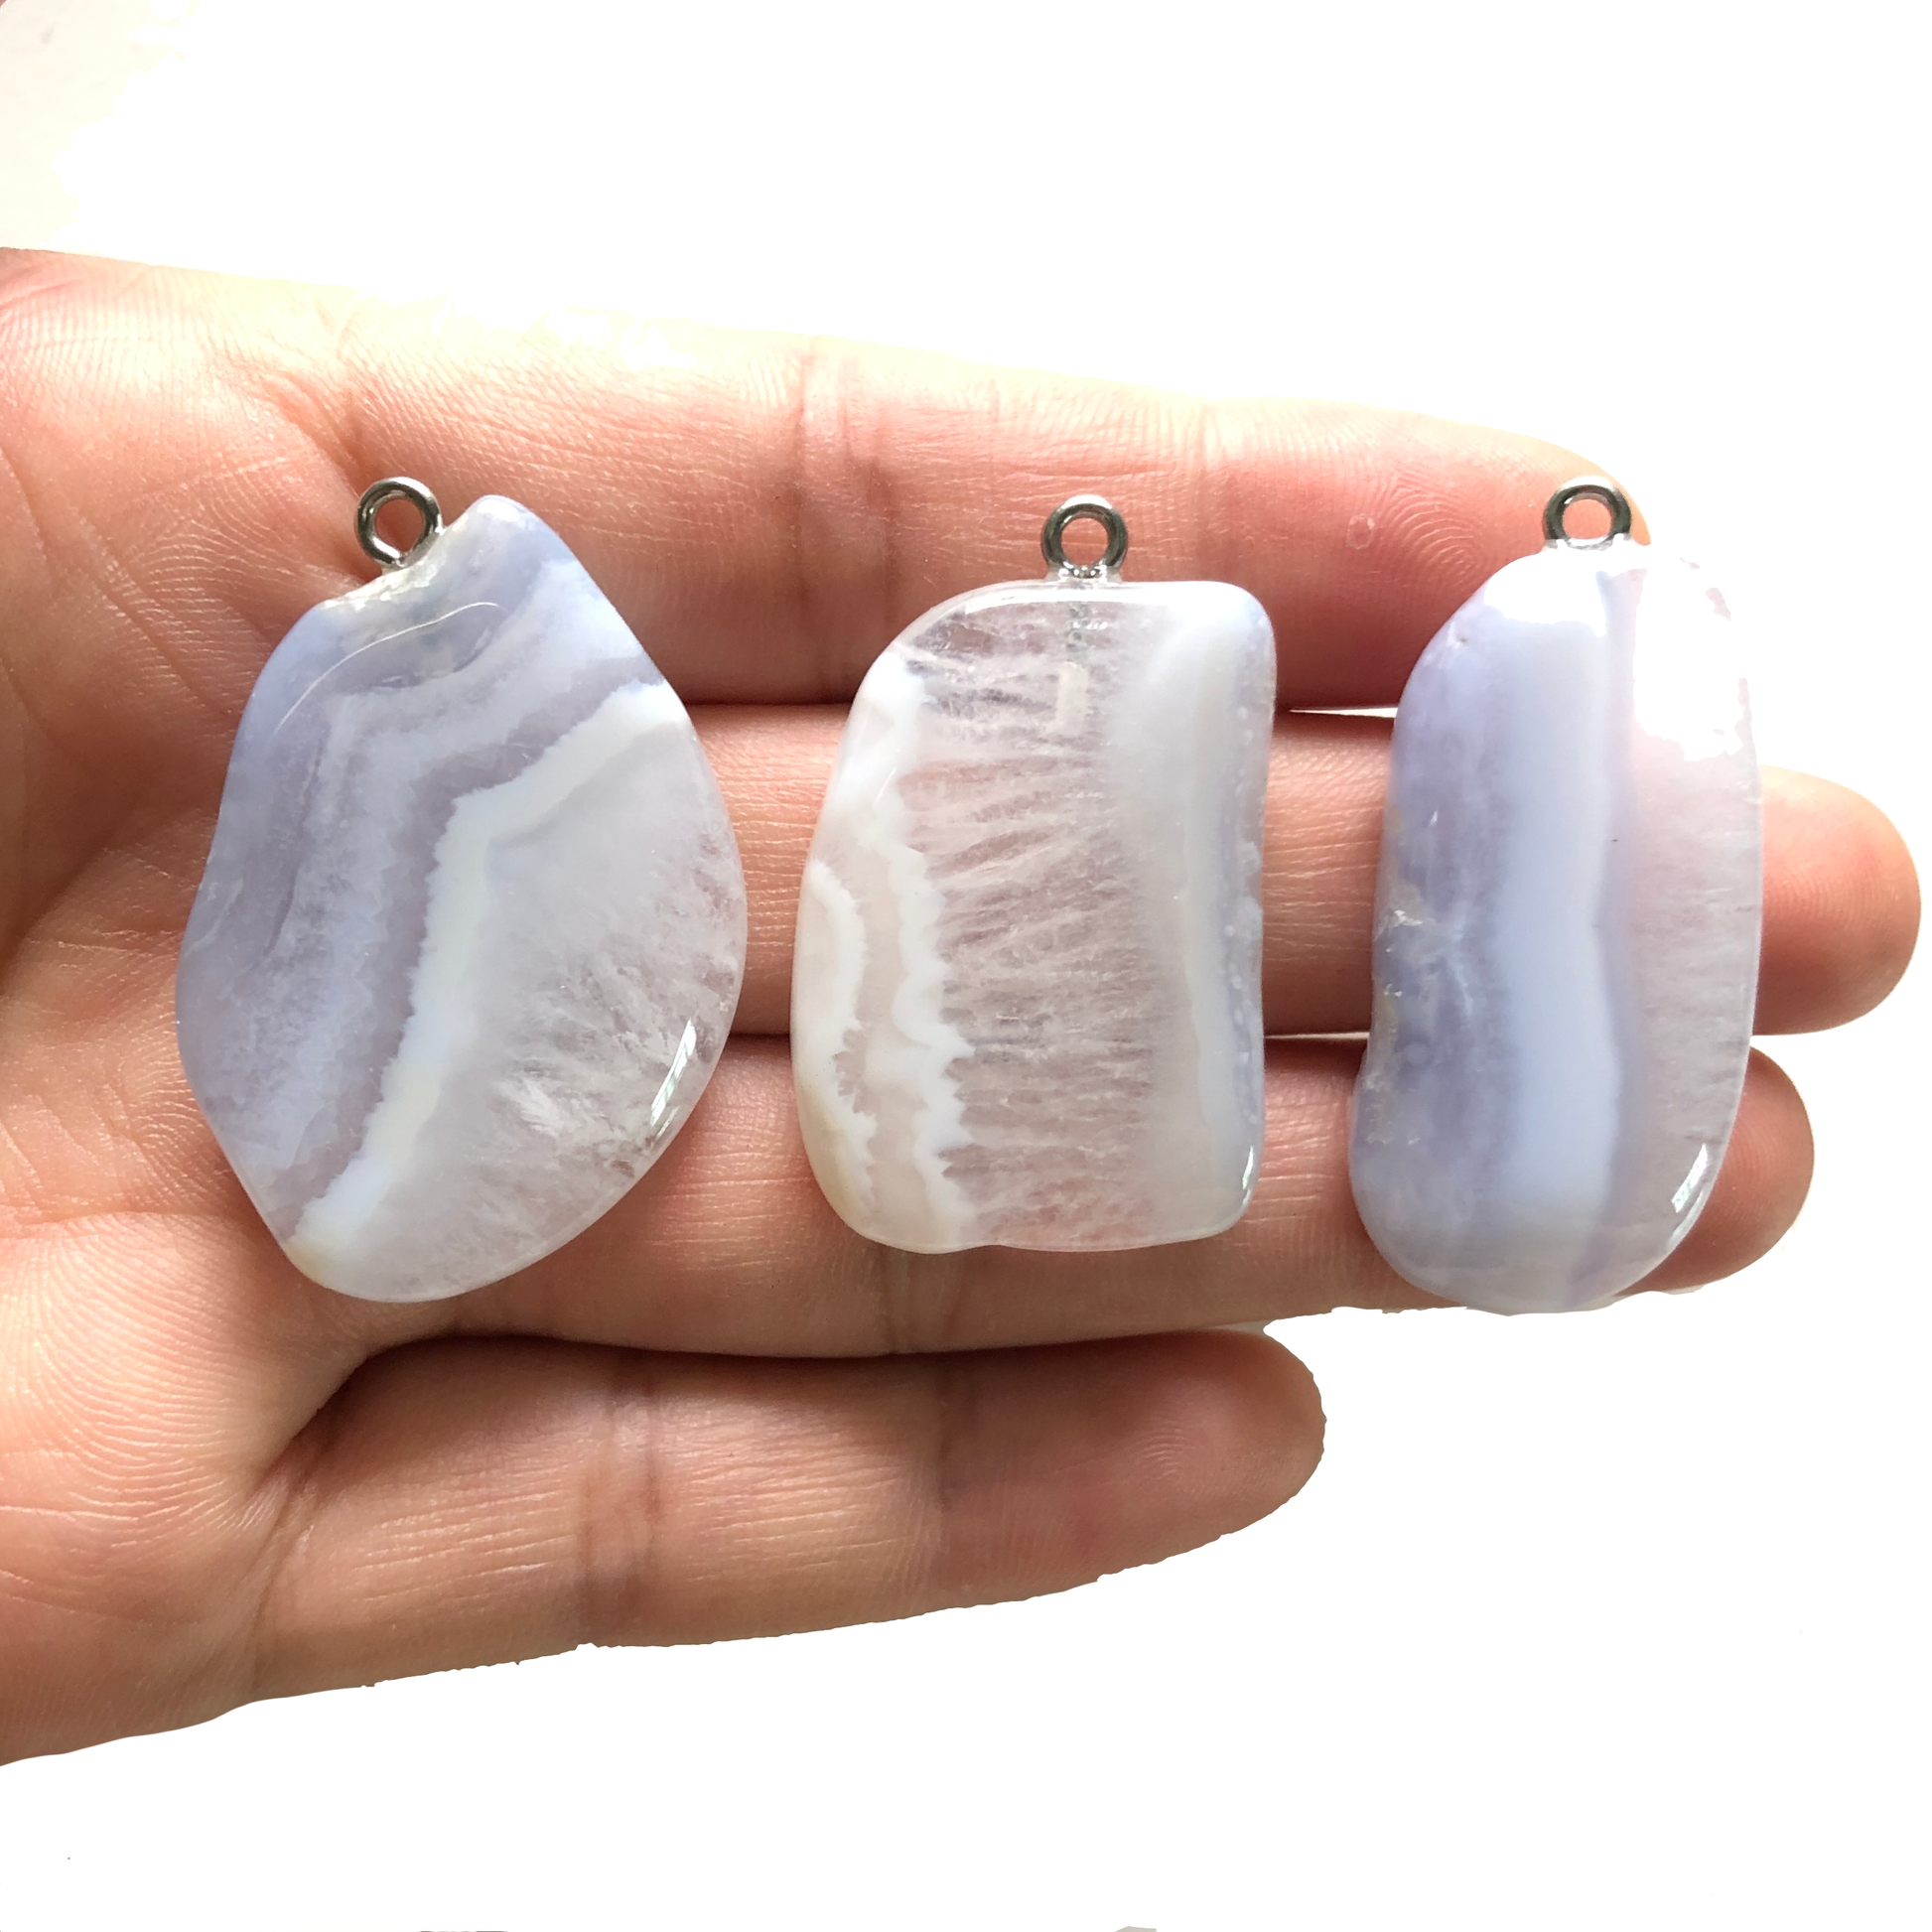 5pcs/lot Natural Blue Lace Agate Charm/Pendant Stone Charms Charms Beads Beyond